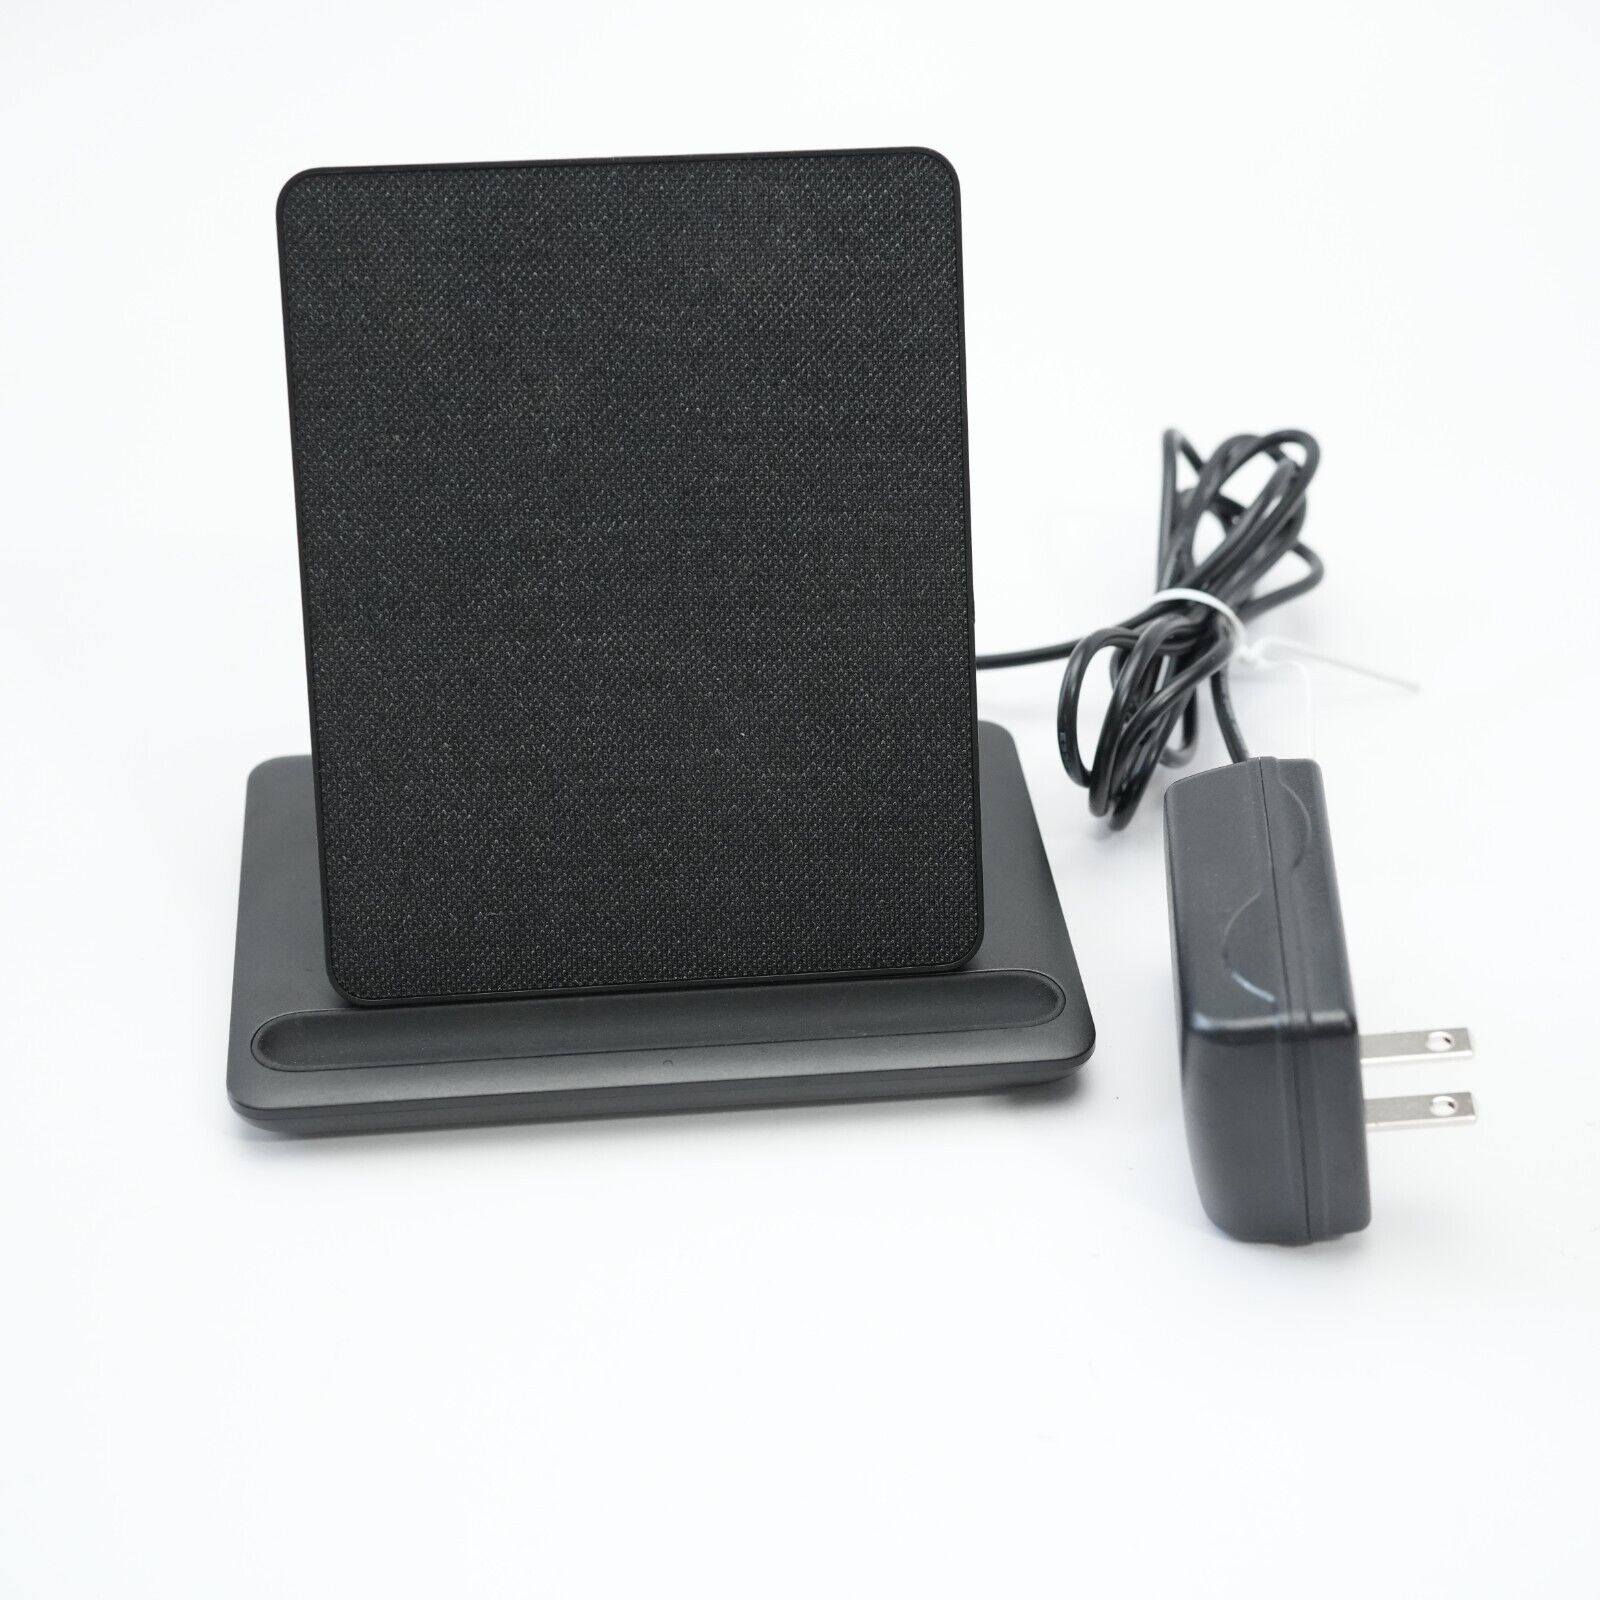 Anker Amazon Y1822 Wireless Fast Charging Dock For Kindle Paperwhite